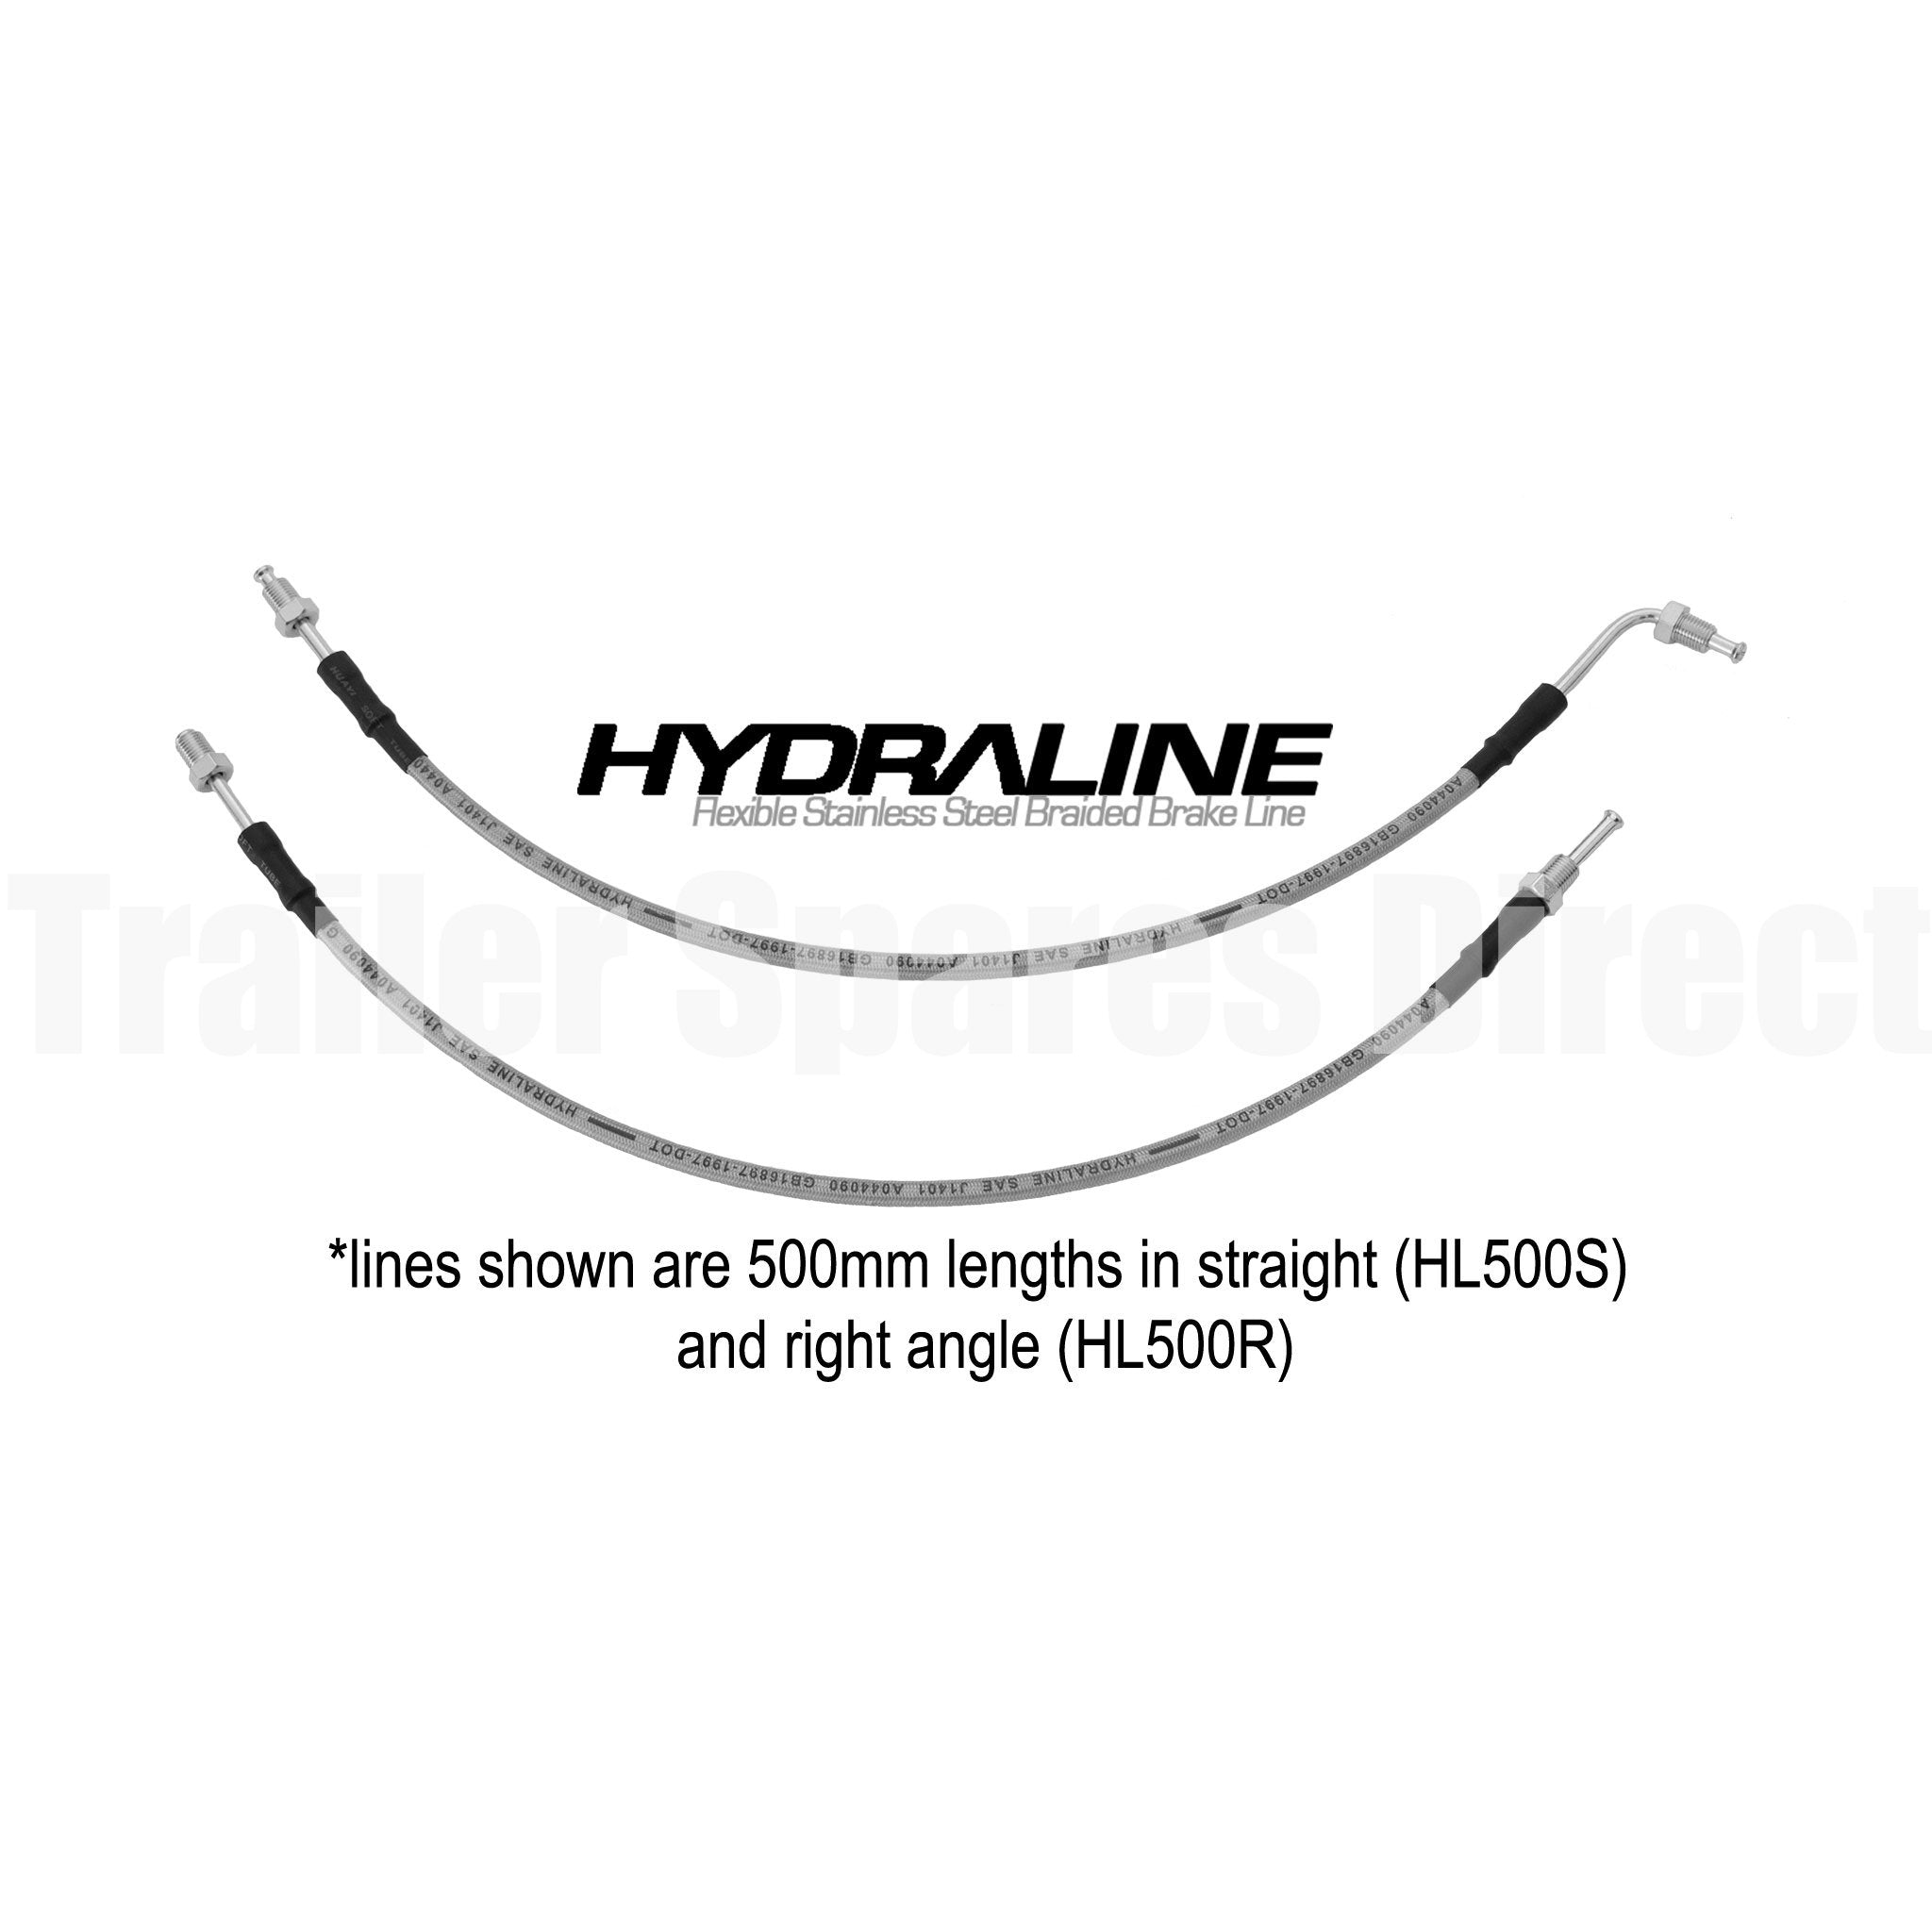 700mm HydraLine brake hose with 90 degree bend